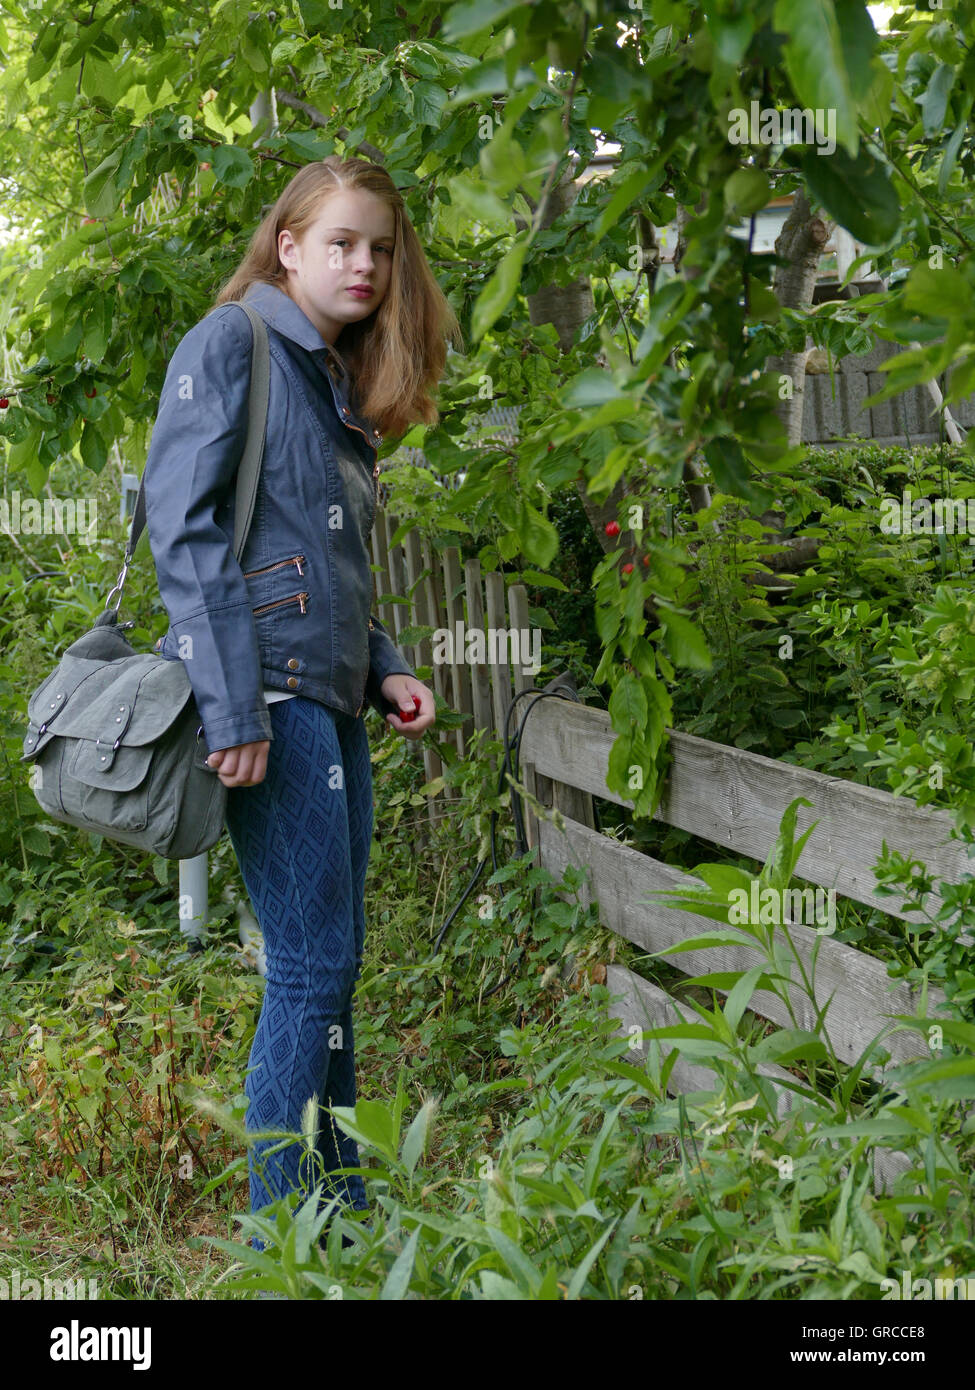 Girl Coming Home From School, In The Countryside Stock Photo